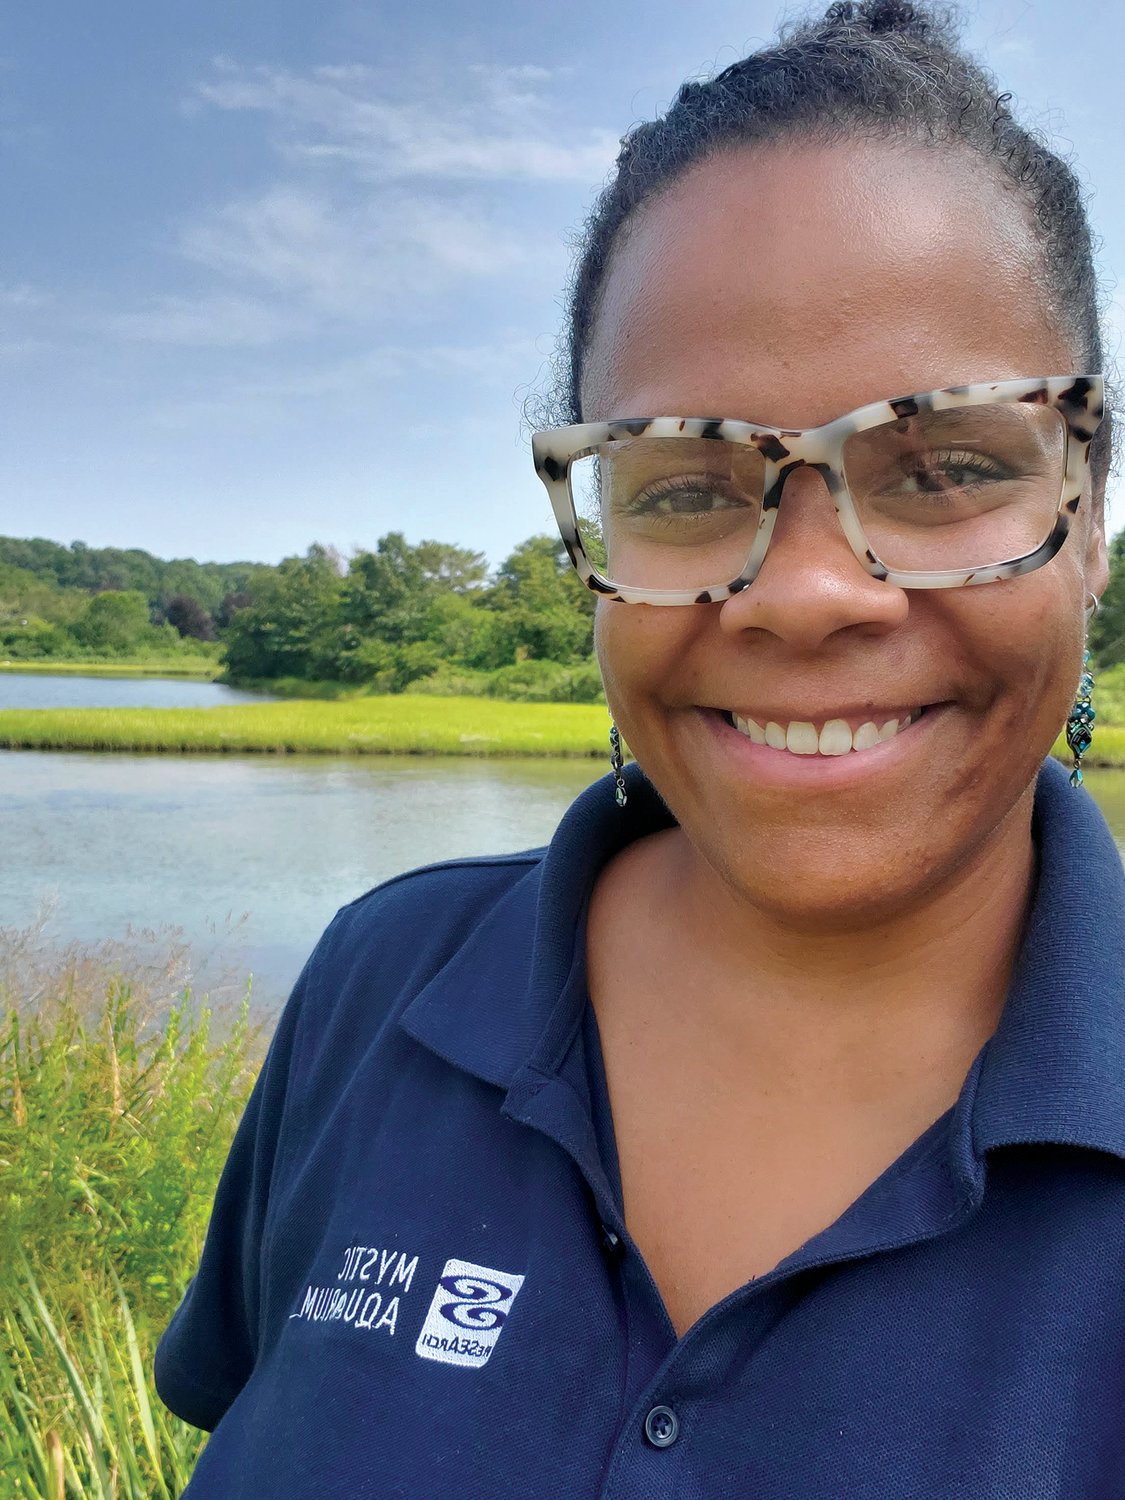 GETTING STUDENTS INVOLVED: Ayana Melvan acts as senior director for strategic partnership at Mystic Aquarium and has previously worked with Cranston students on past projects. She was also a part of a mentorship program that focused on  STEM.